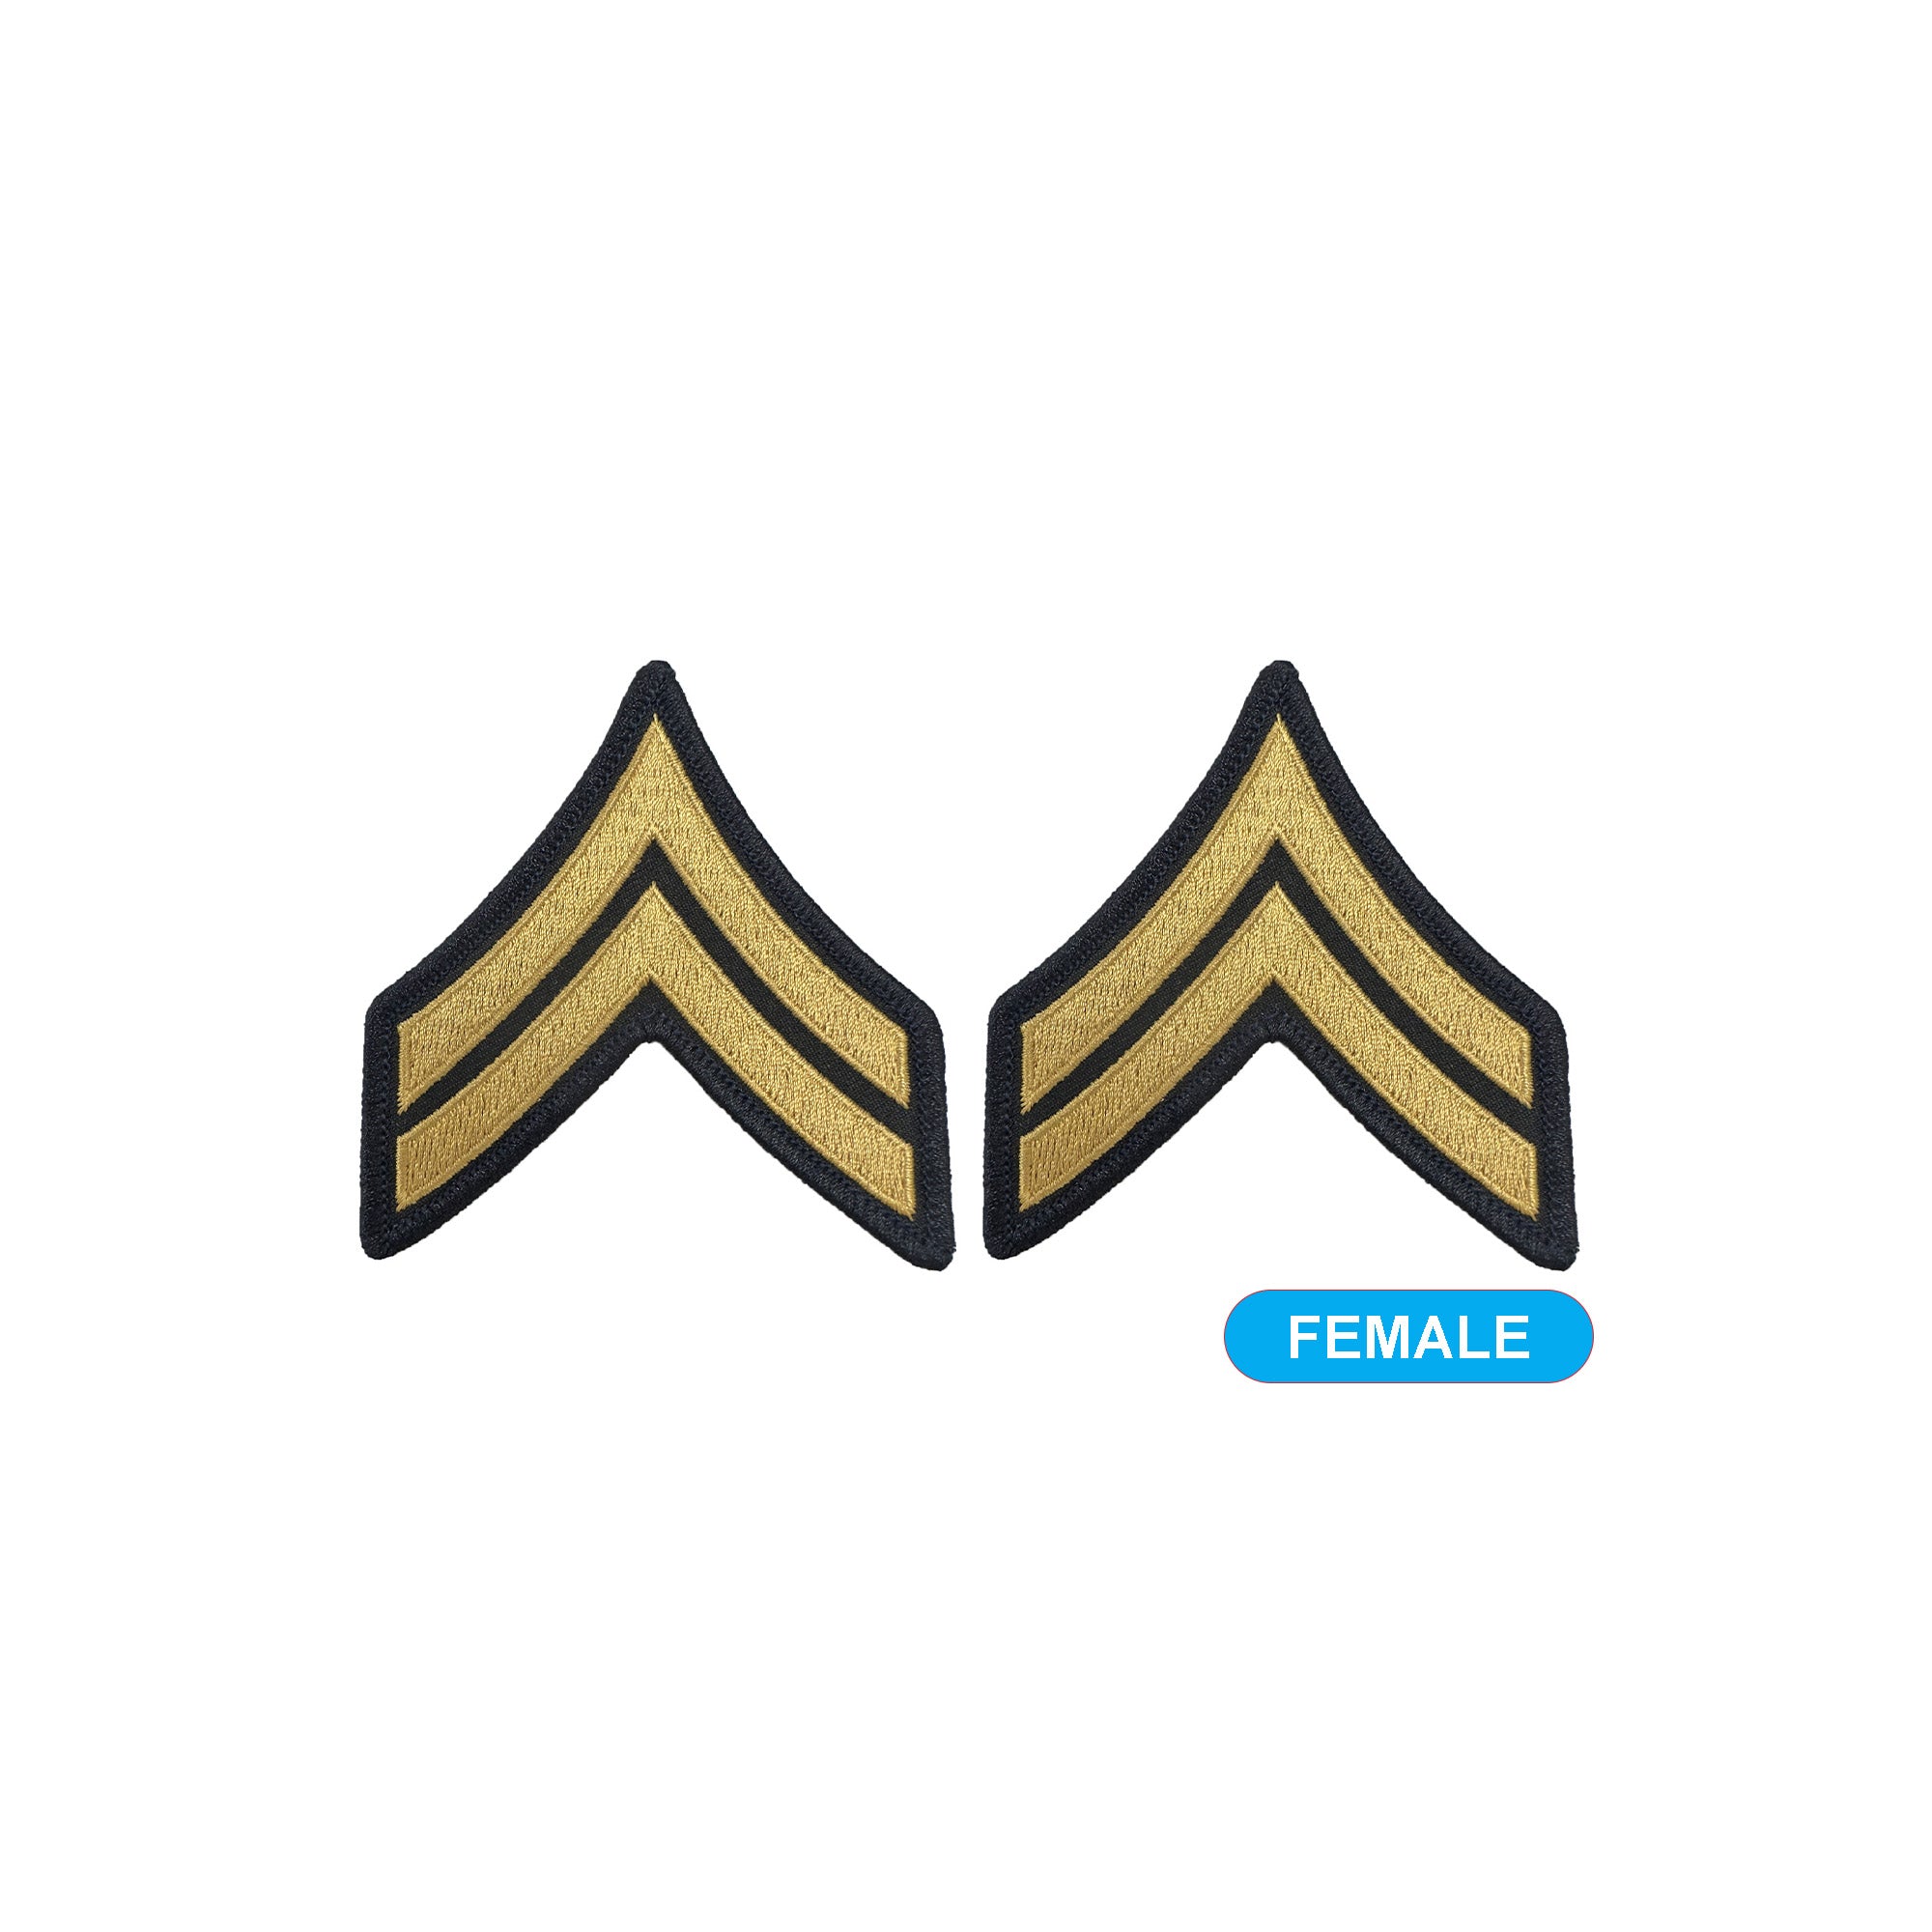 E4 Corporal Gold on Blue Sew-on - Small-Female - Insignia Depot